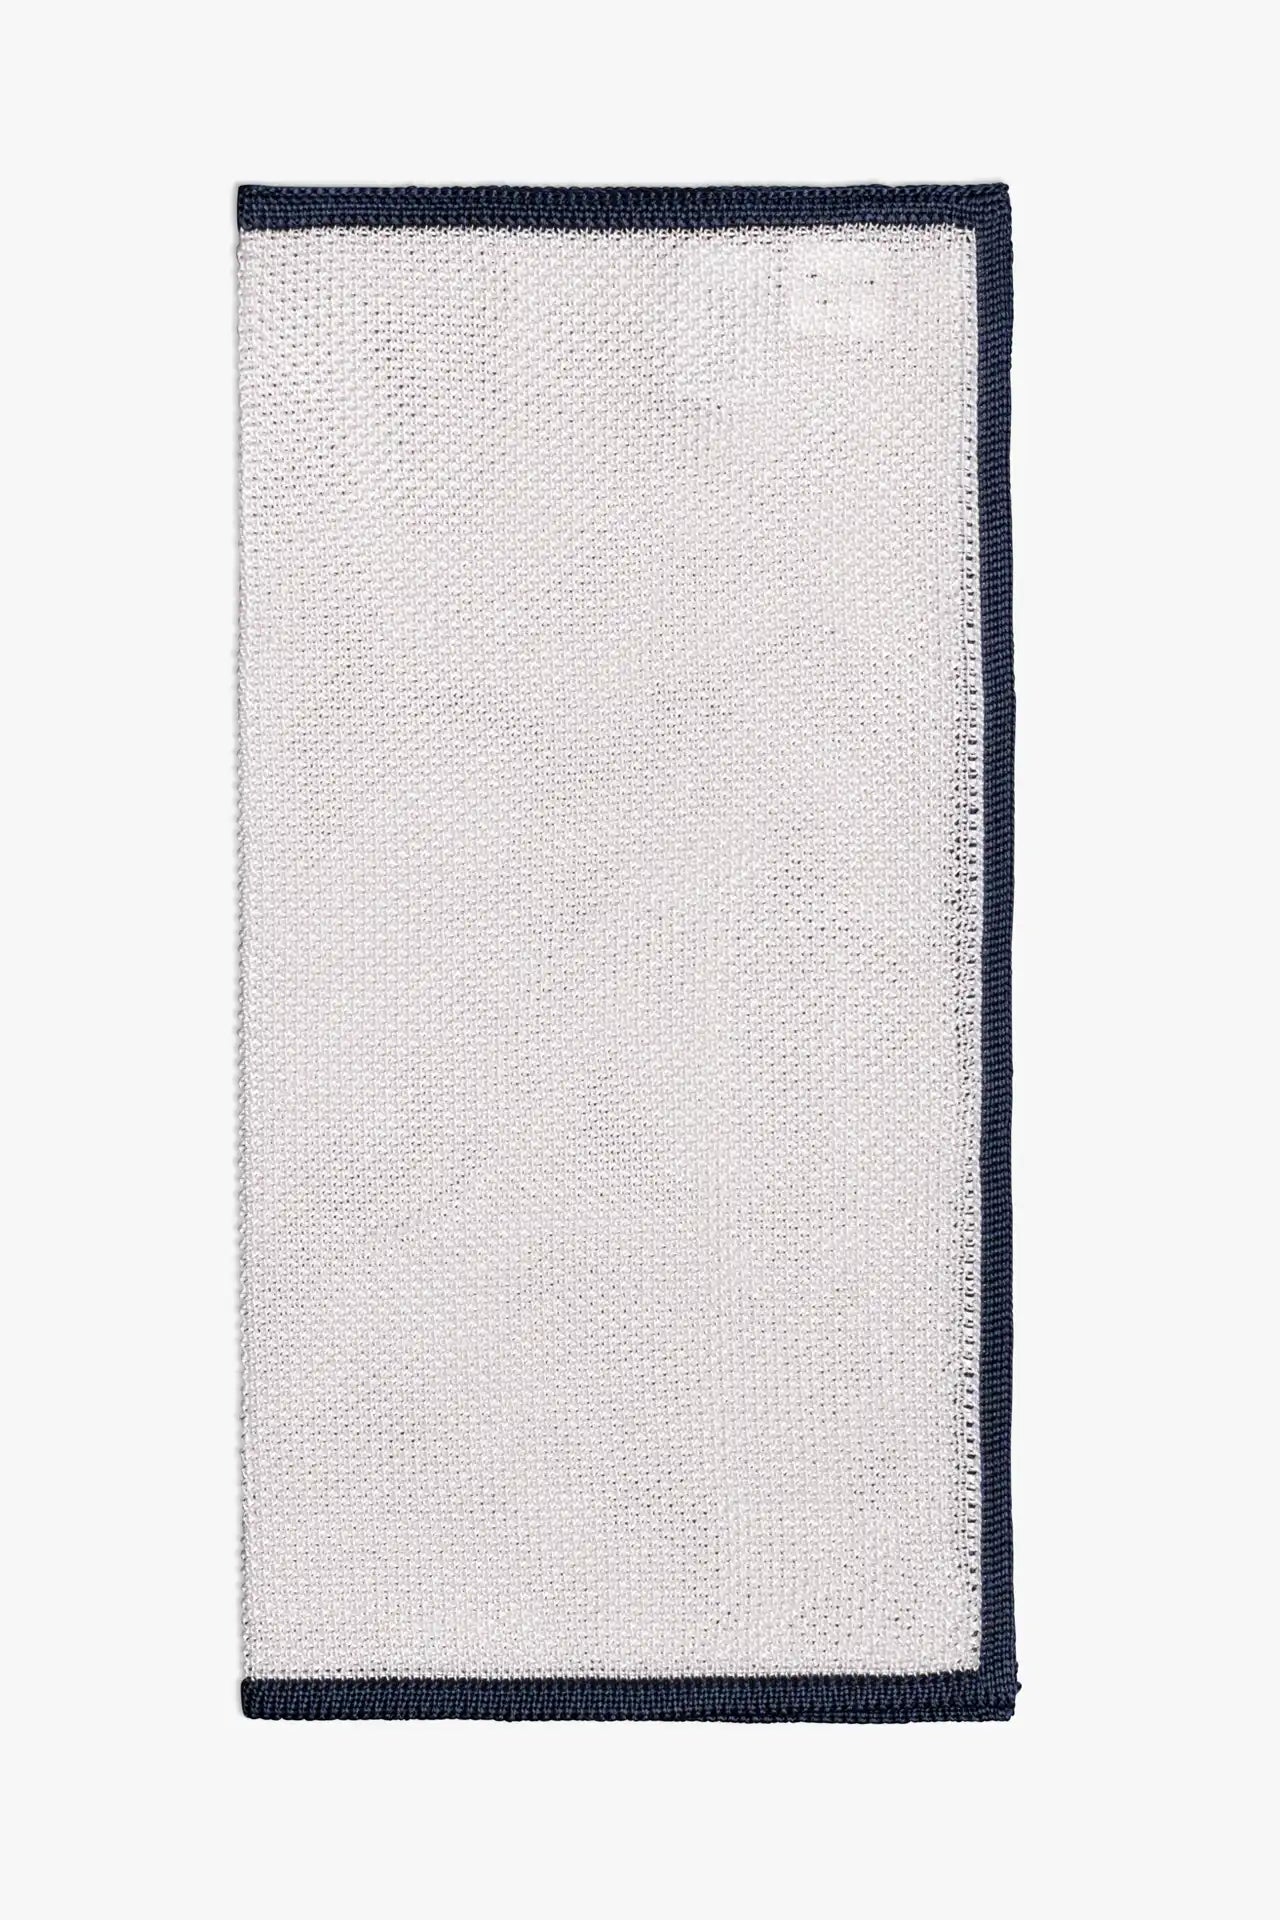 White knitted silk pocket square with navy blue frame. Made in Italy.